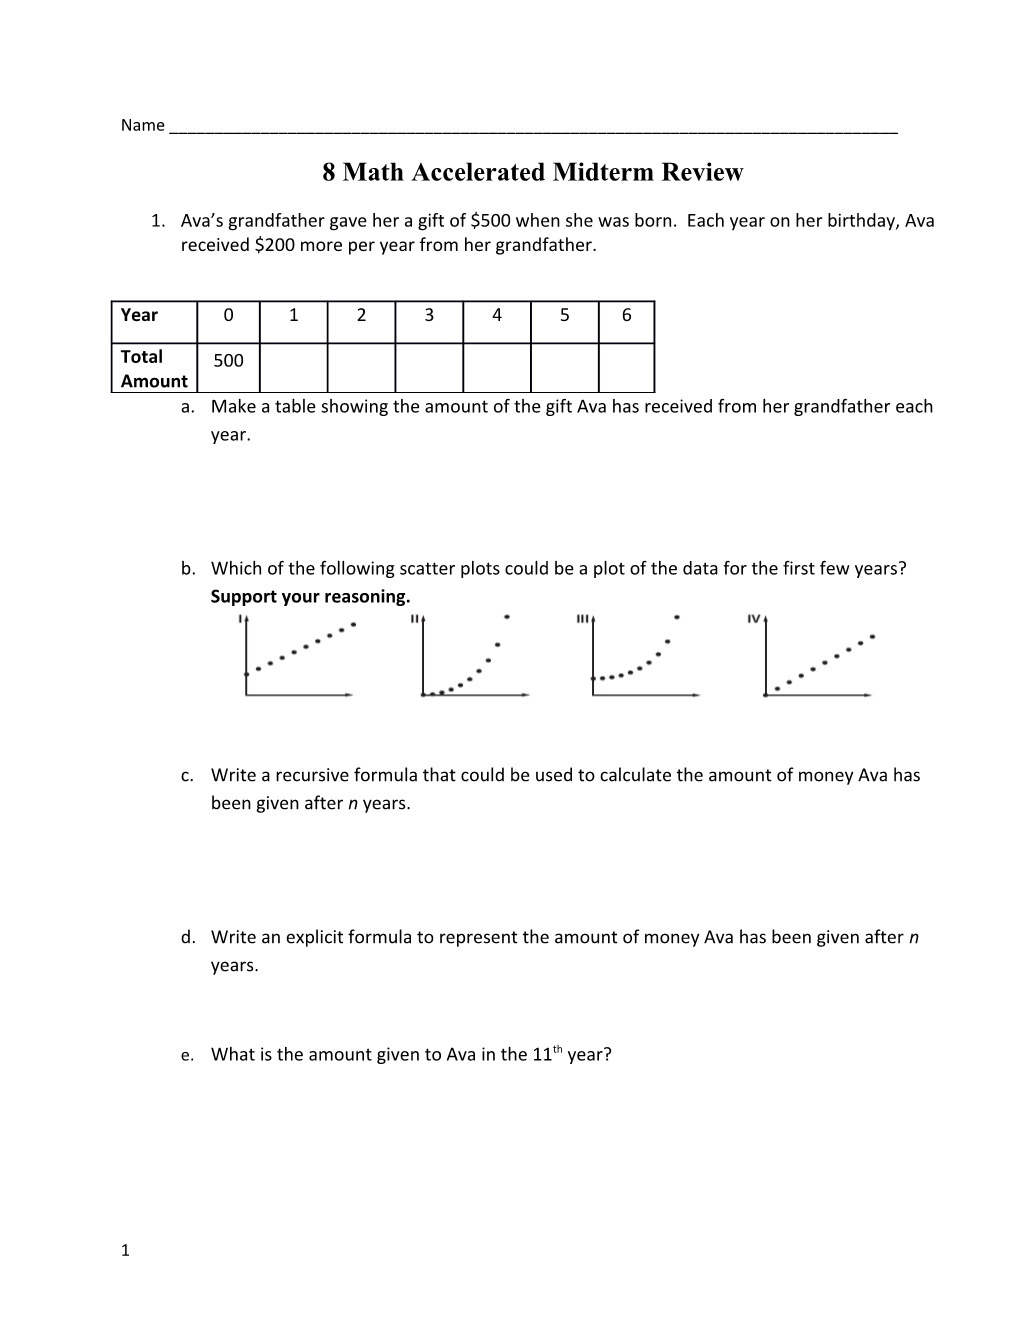 8 Math Accelerated Midterm Review